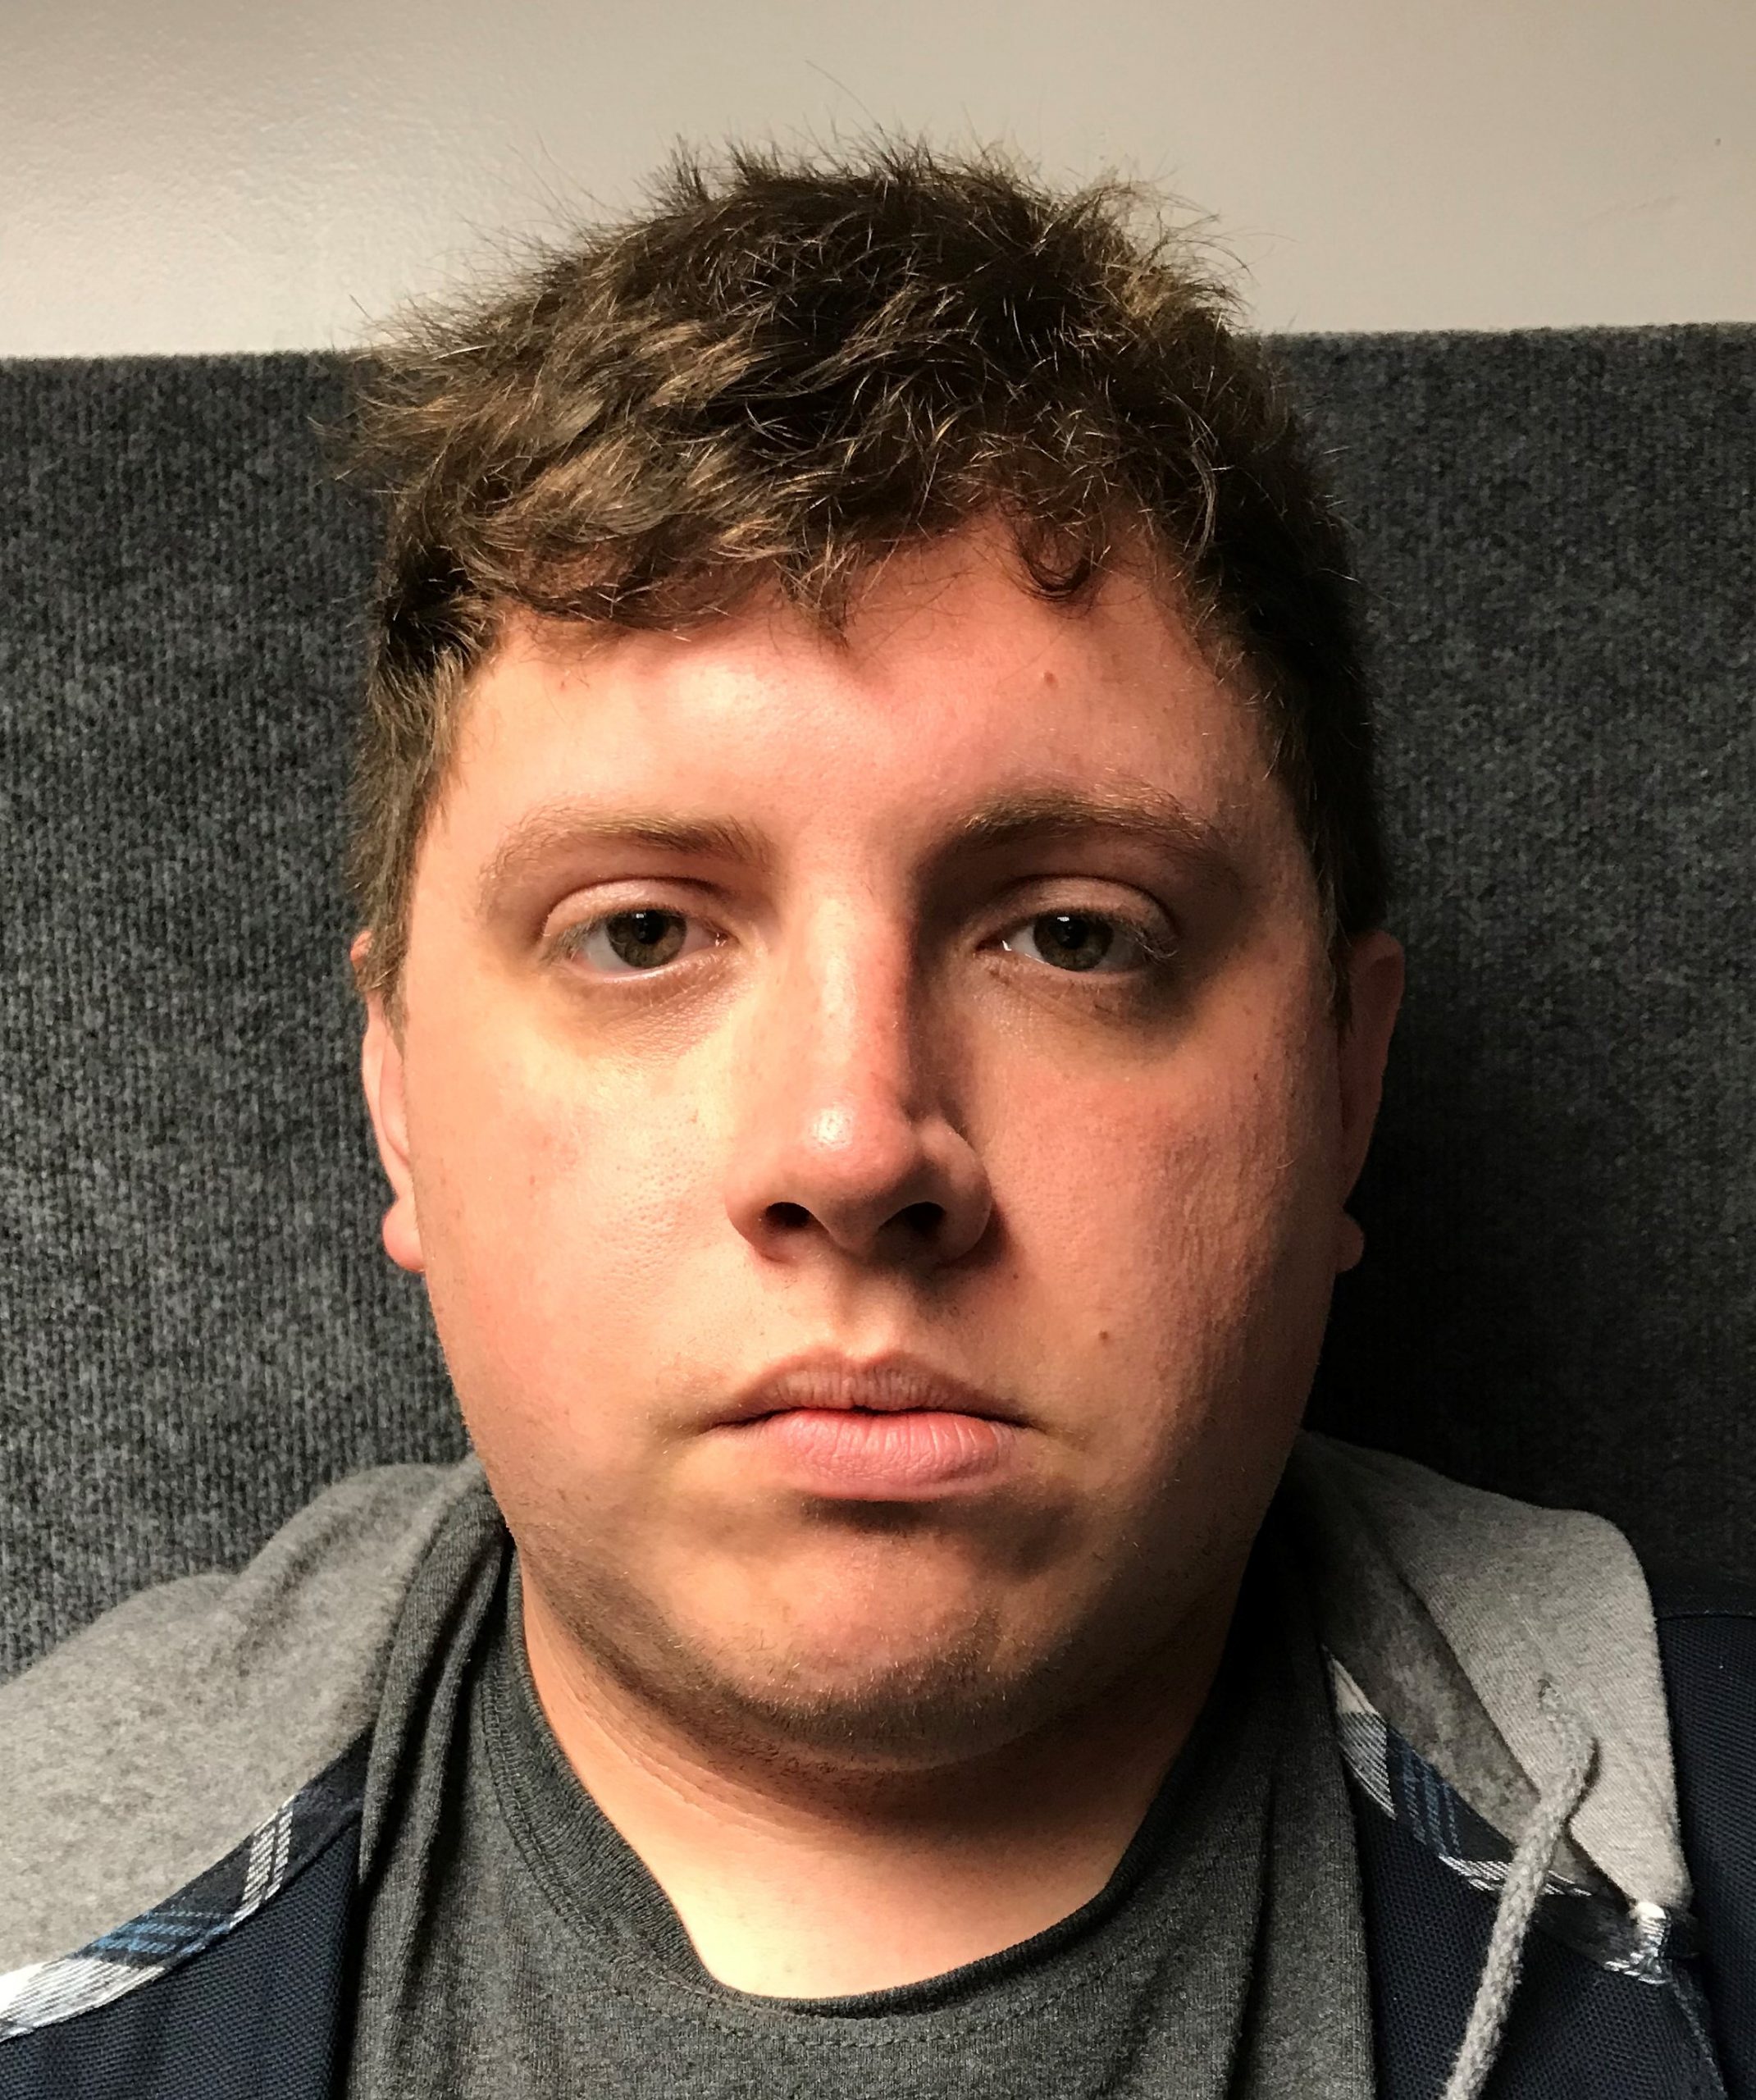  Beardstown Man Arrested by ISP For Child Pornography Charges 